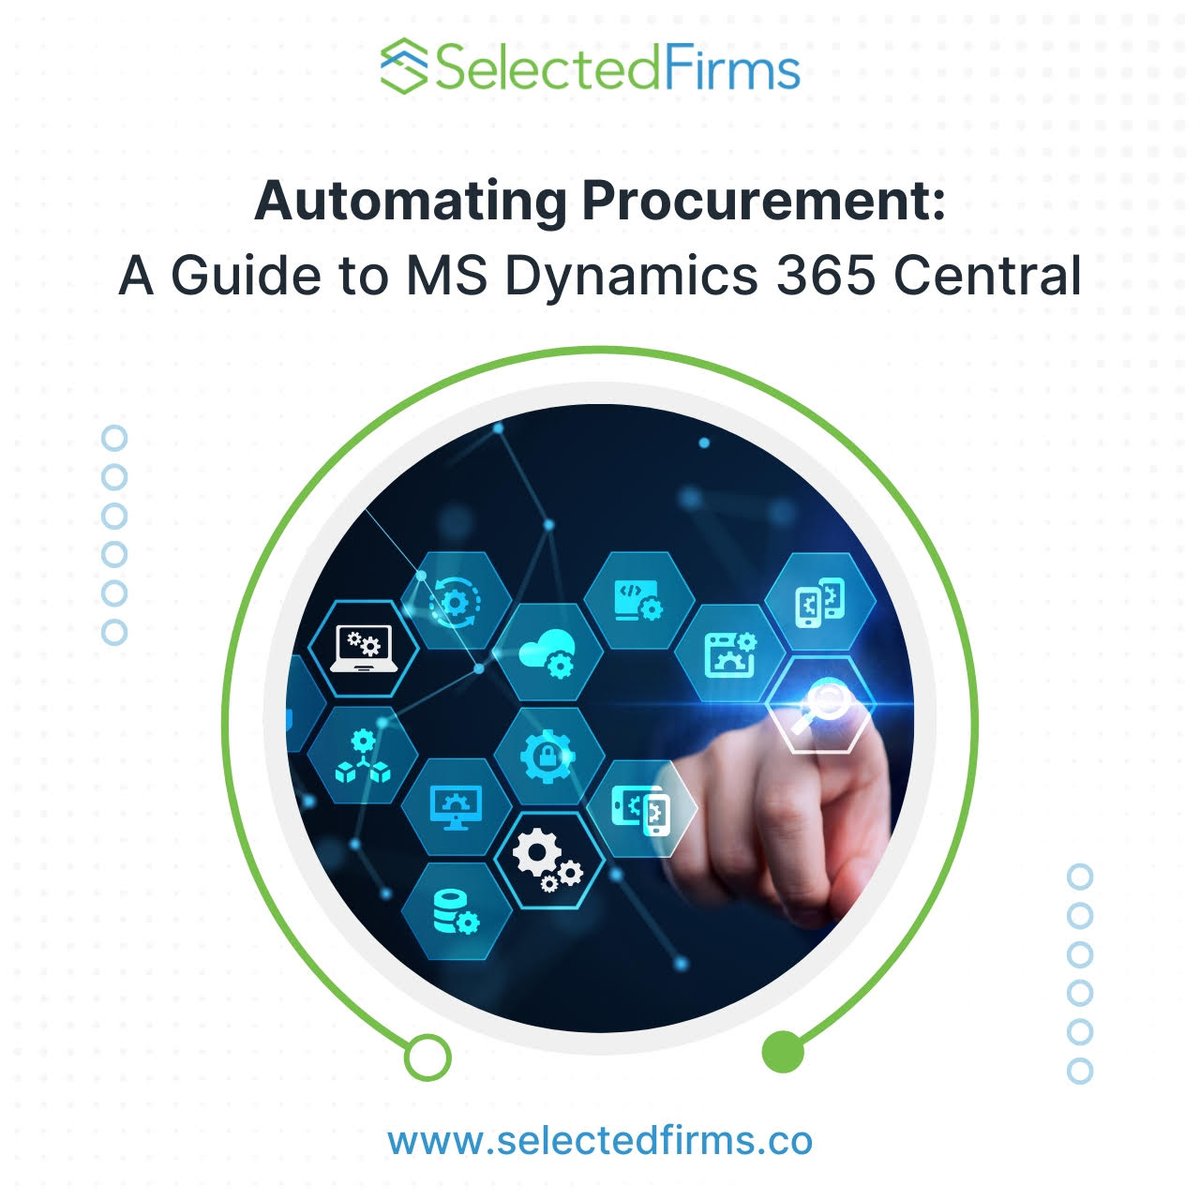 Let's learn more insightful information on

Automating Procurement: A Guide to MS Dynamics 365 Central: j1l.in/vdiLCn
 
#selectedfirms #automation #procurement #procurementprocess #automatingprocurement #automatingprocurementprocess #msdynamics365 #msdynamics